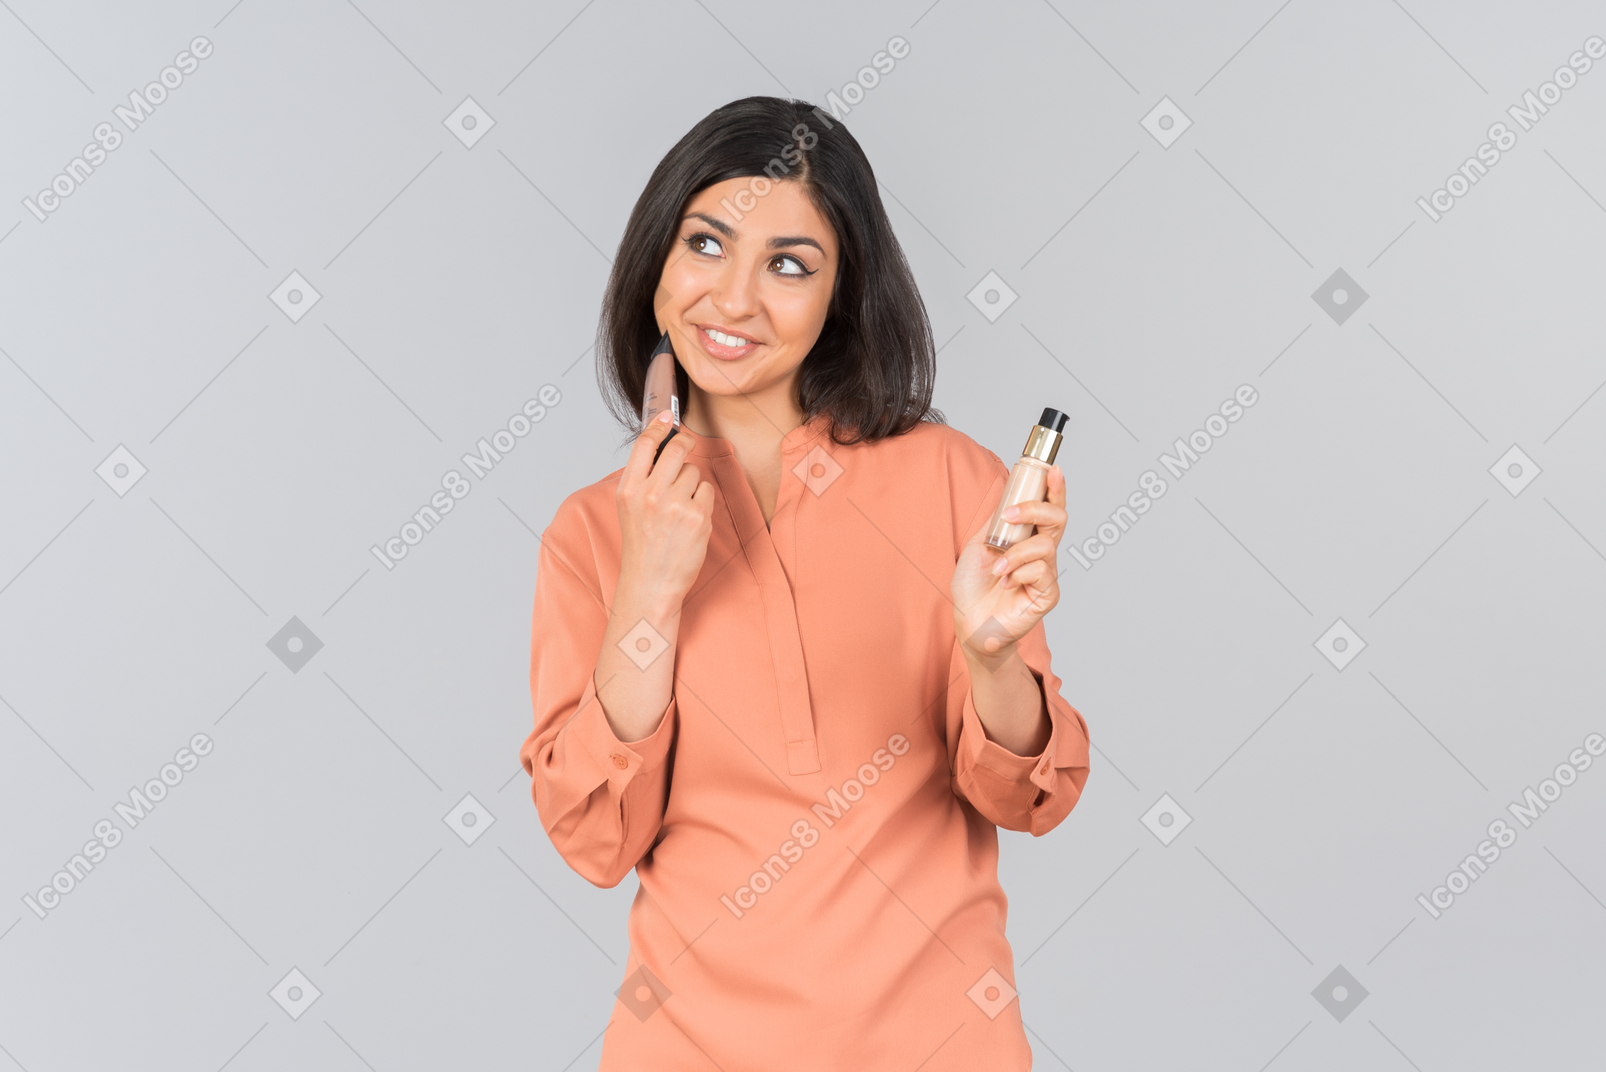 Indian woman pointing at lip balms she's holding